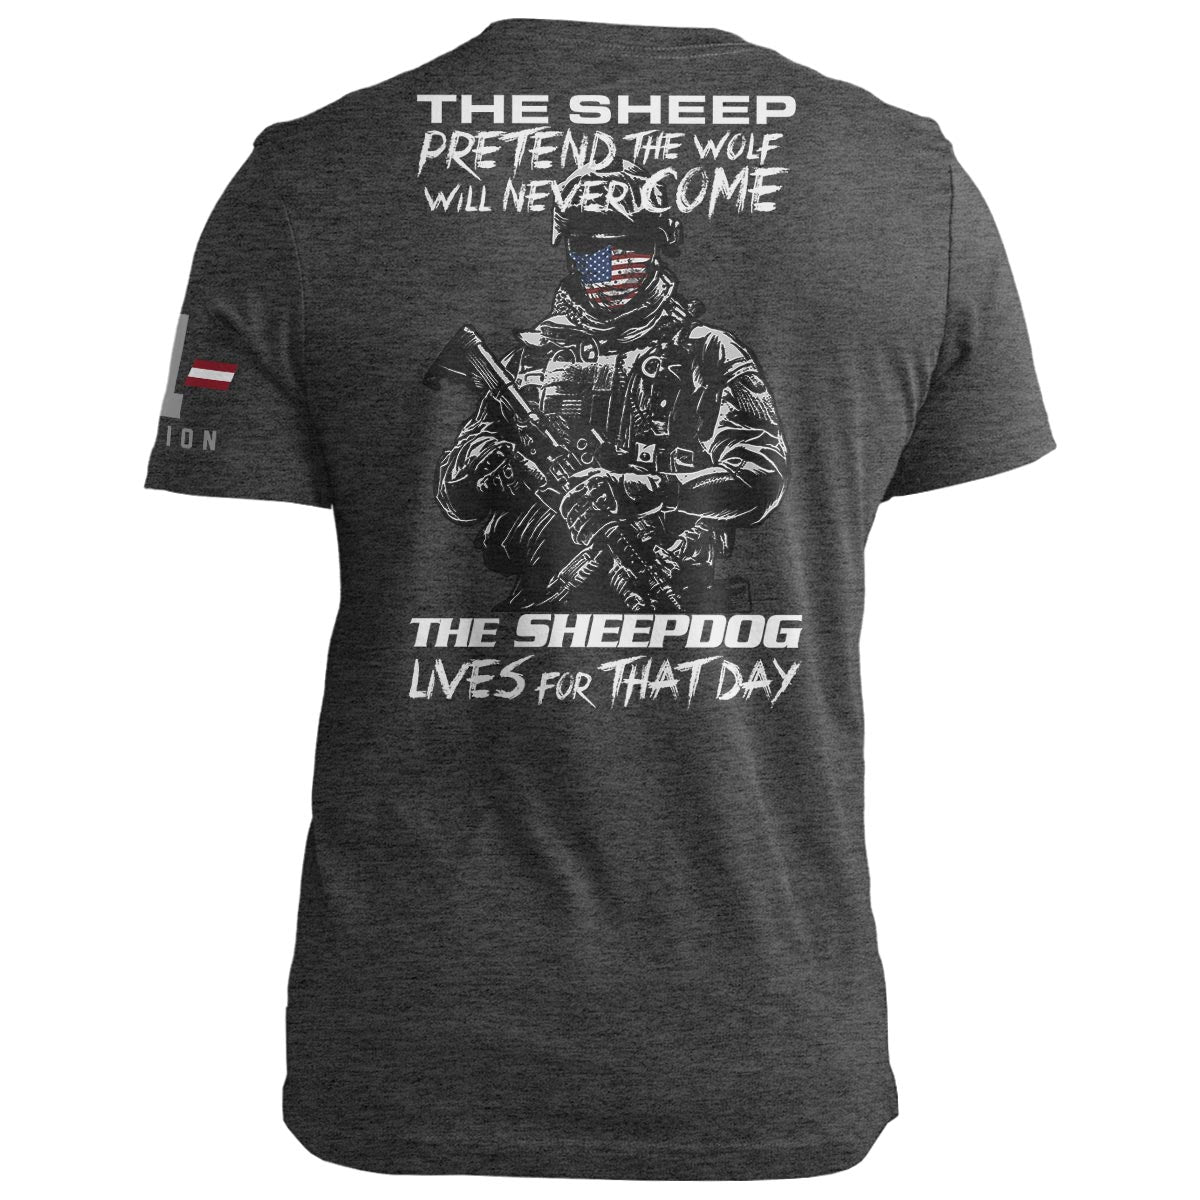 Sheepdogs Live for that Day